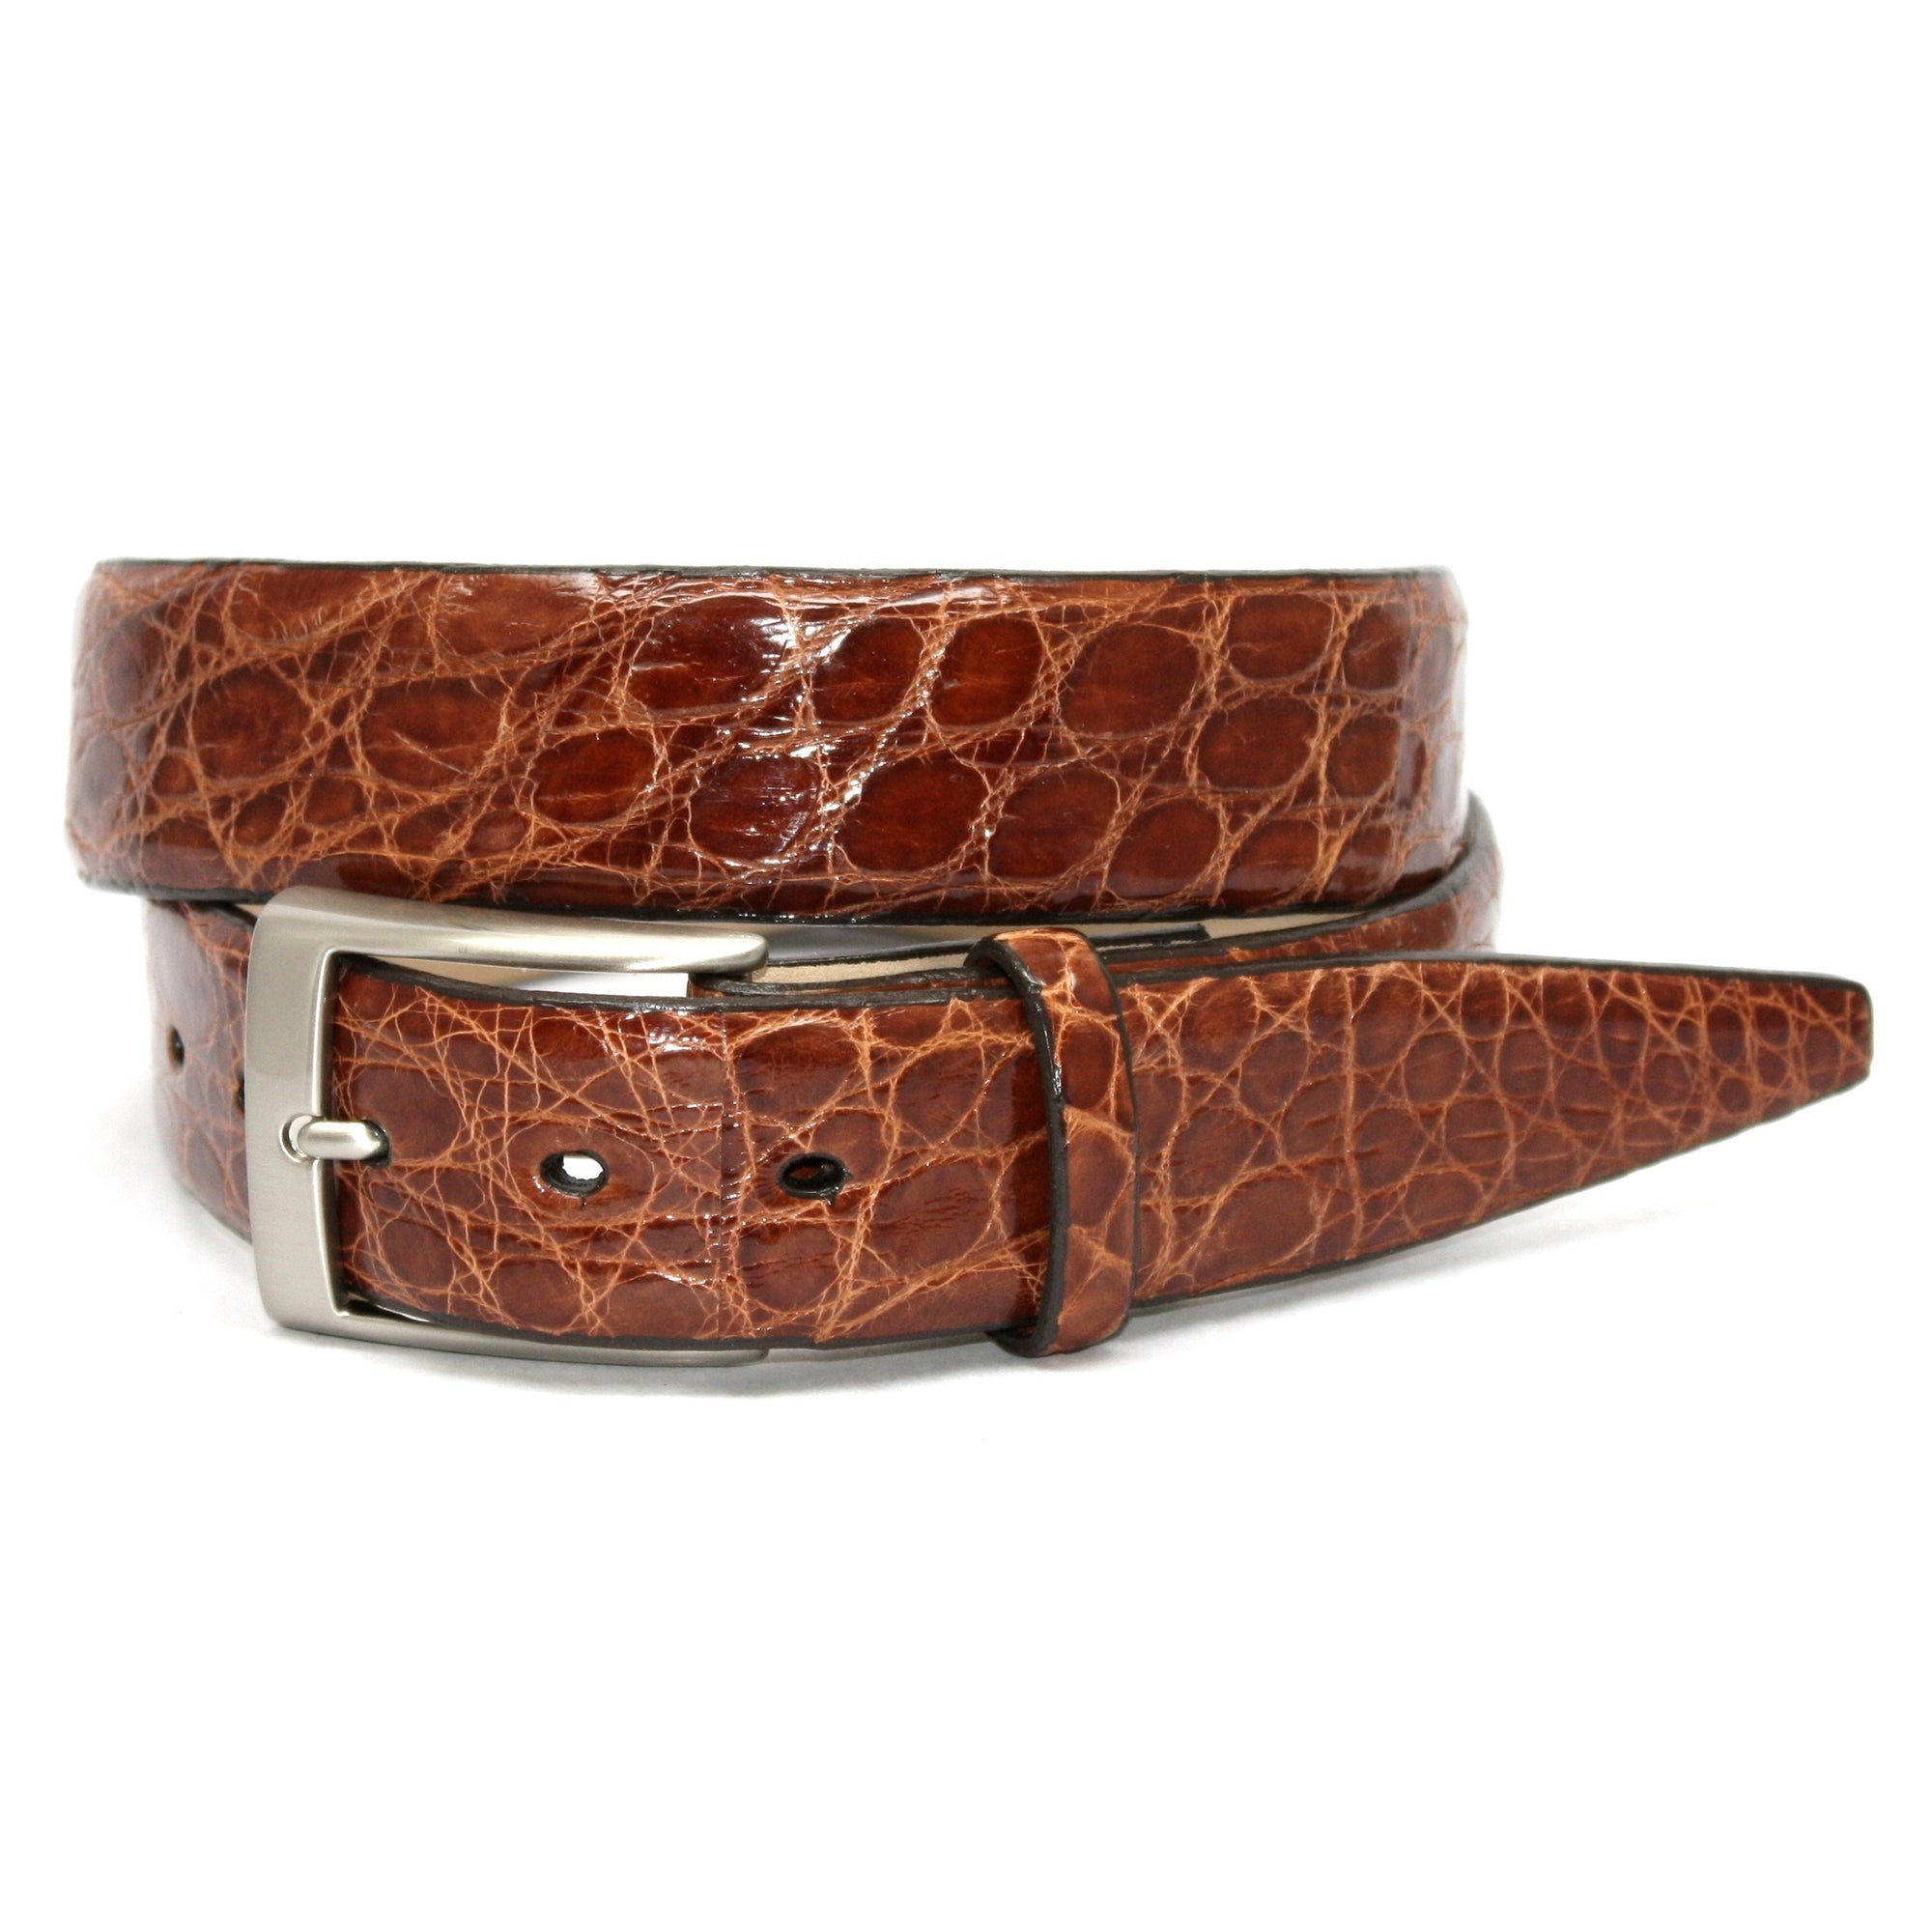 Glazed South American Caiman Belt in Cognac by Torino Leather